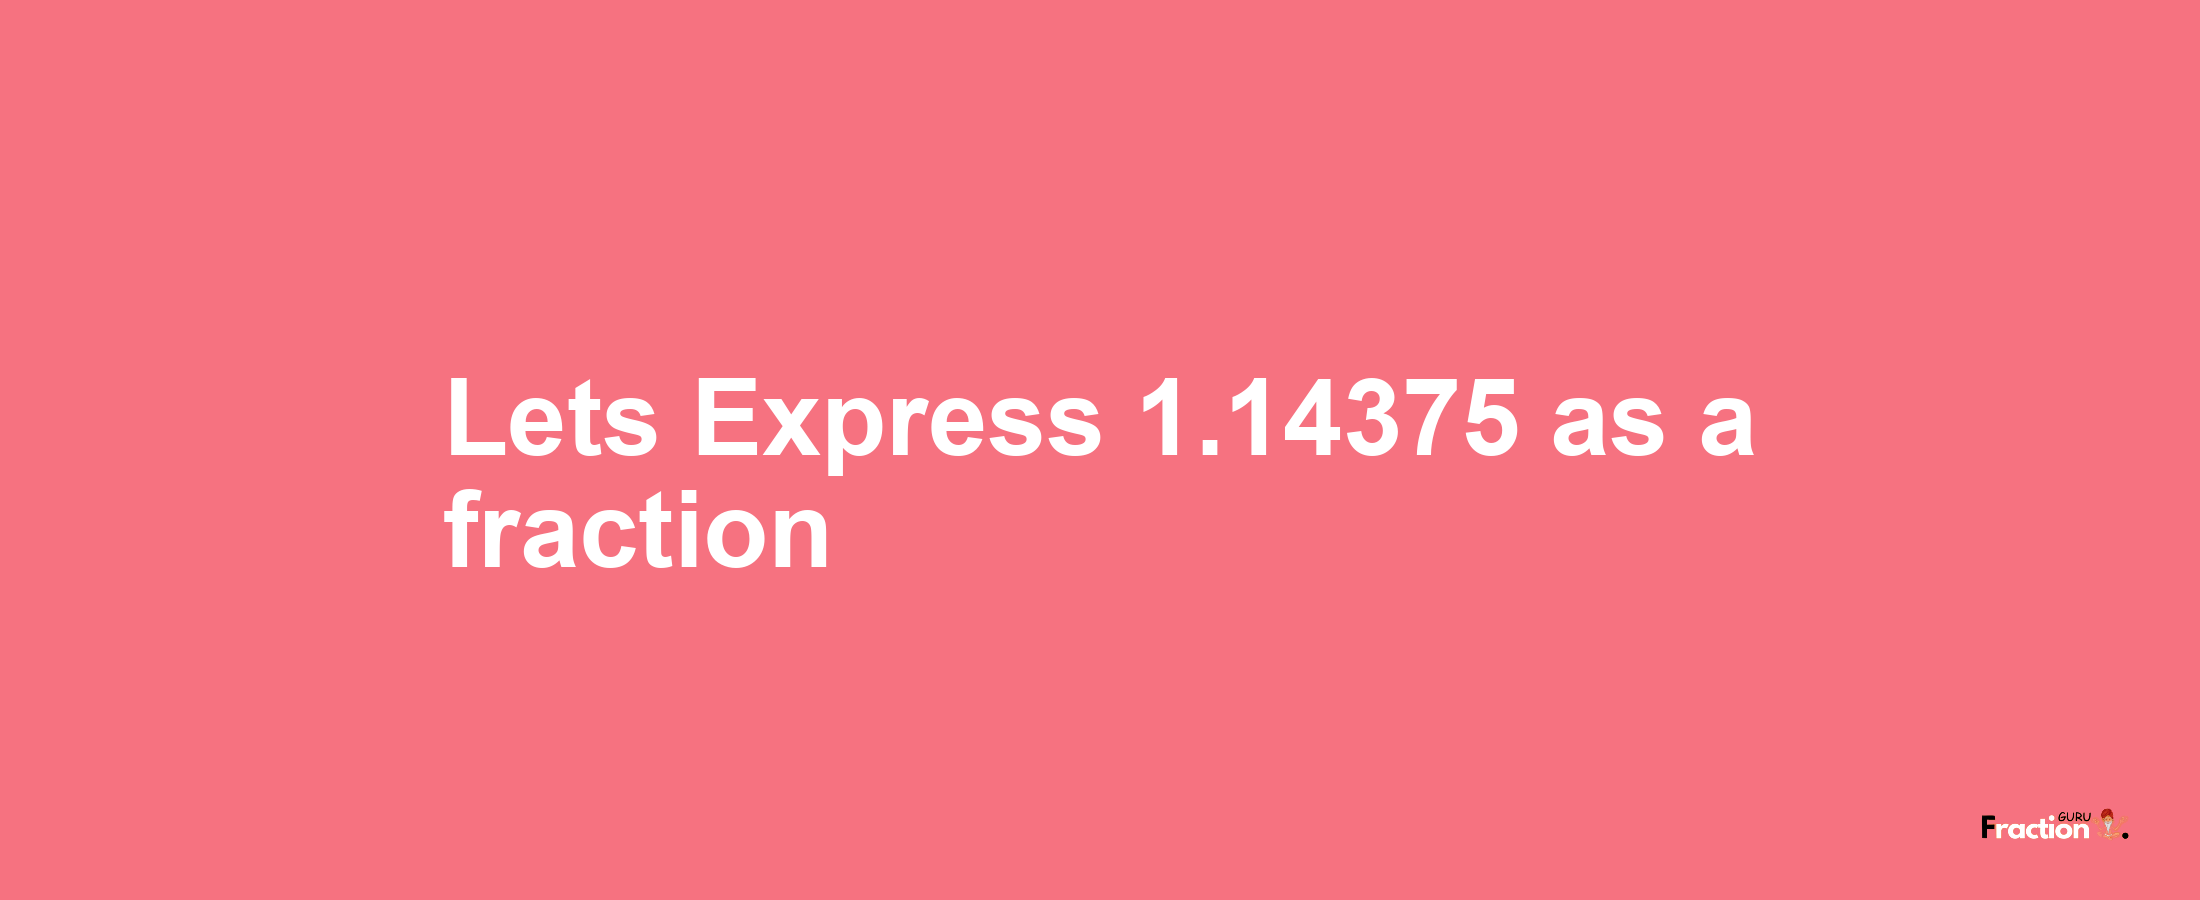 Lets Express 1.14375 as afraction